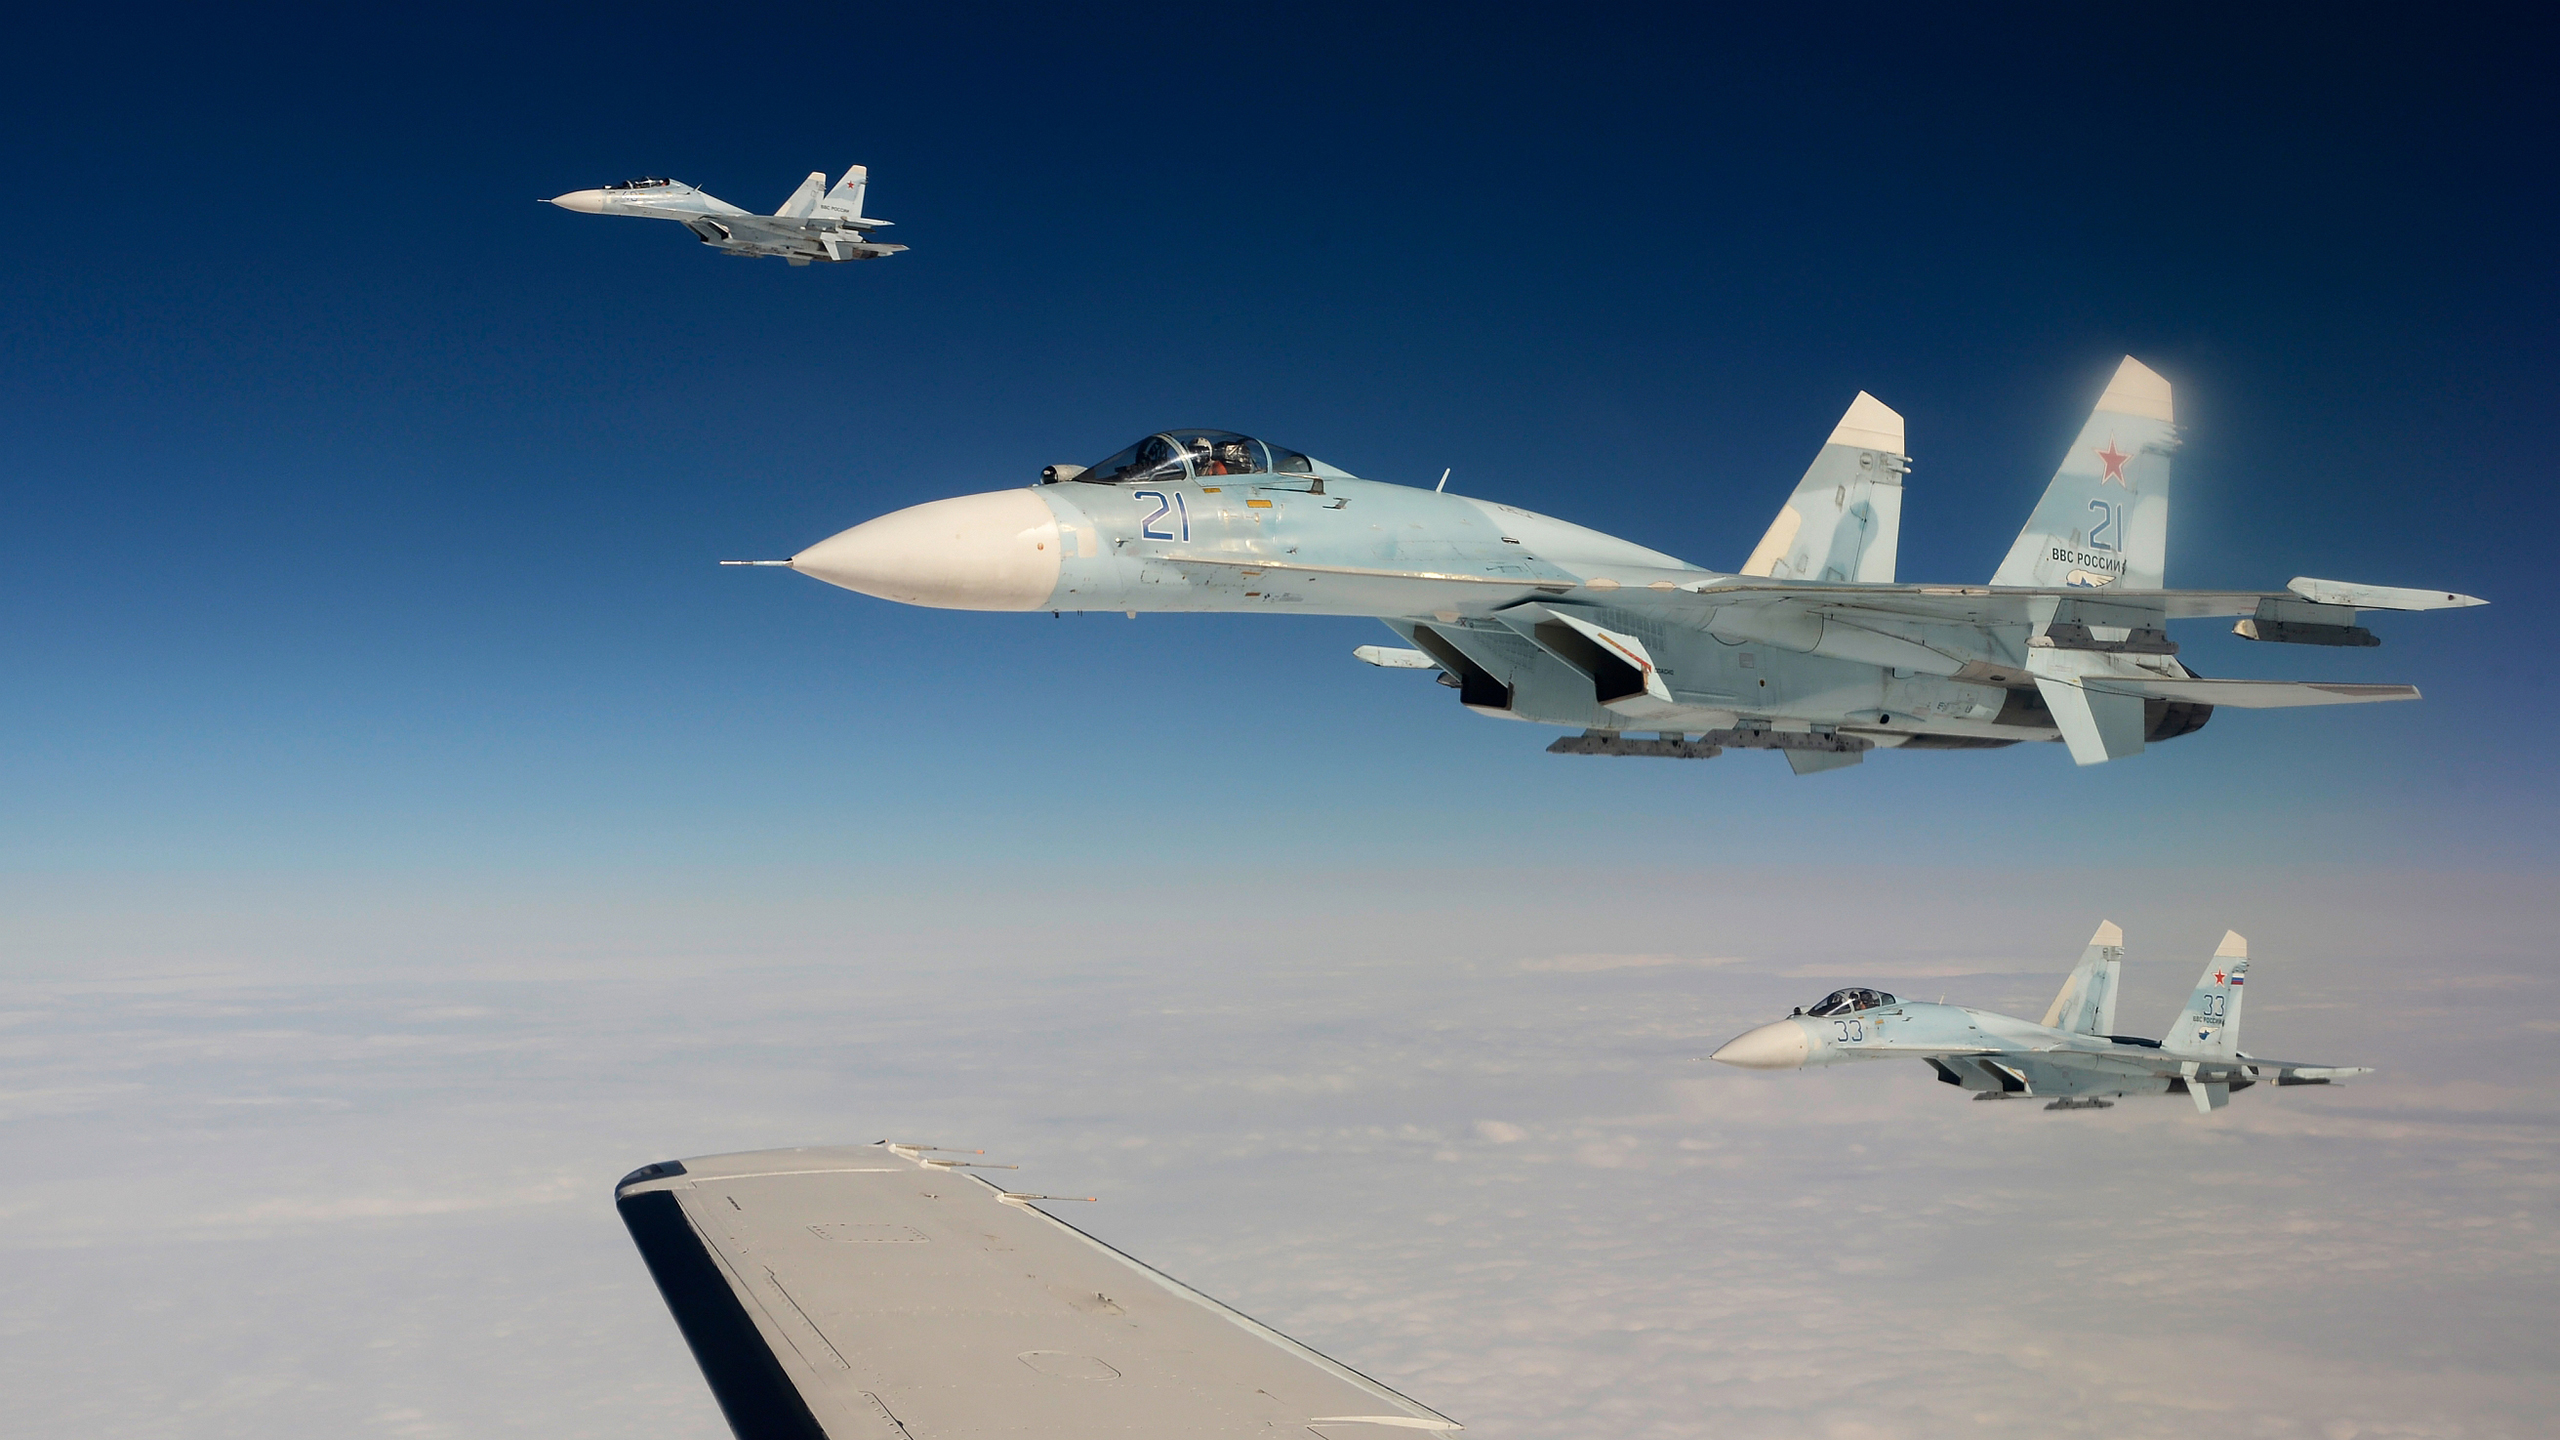 Su 27 Sukhoi Su 27 Aircraft Military Aircraft Jet Fighter Russian Air Force Vehicle 2560x1440